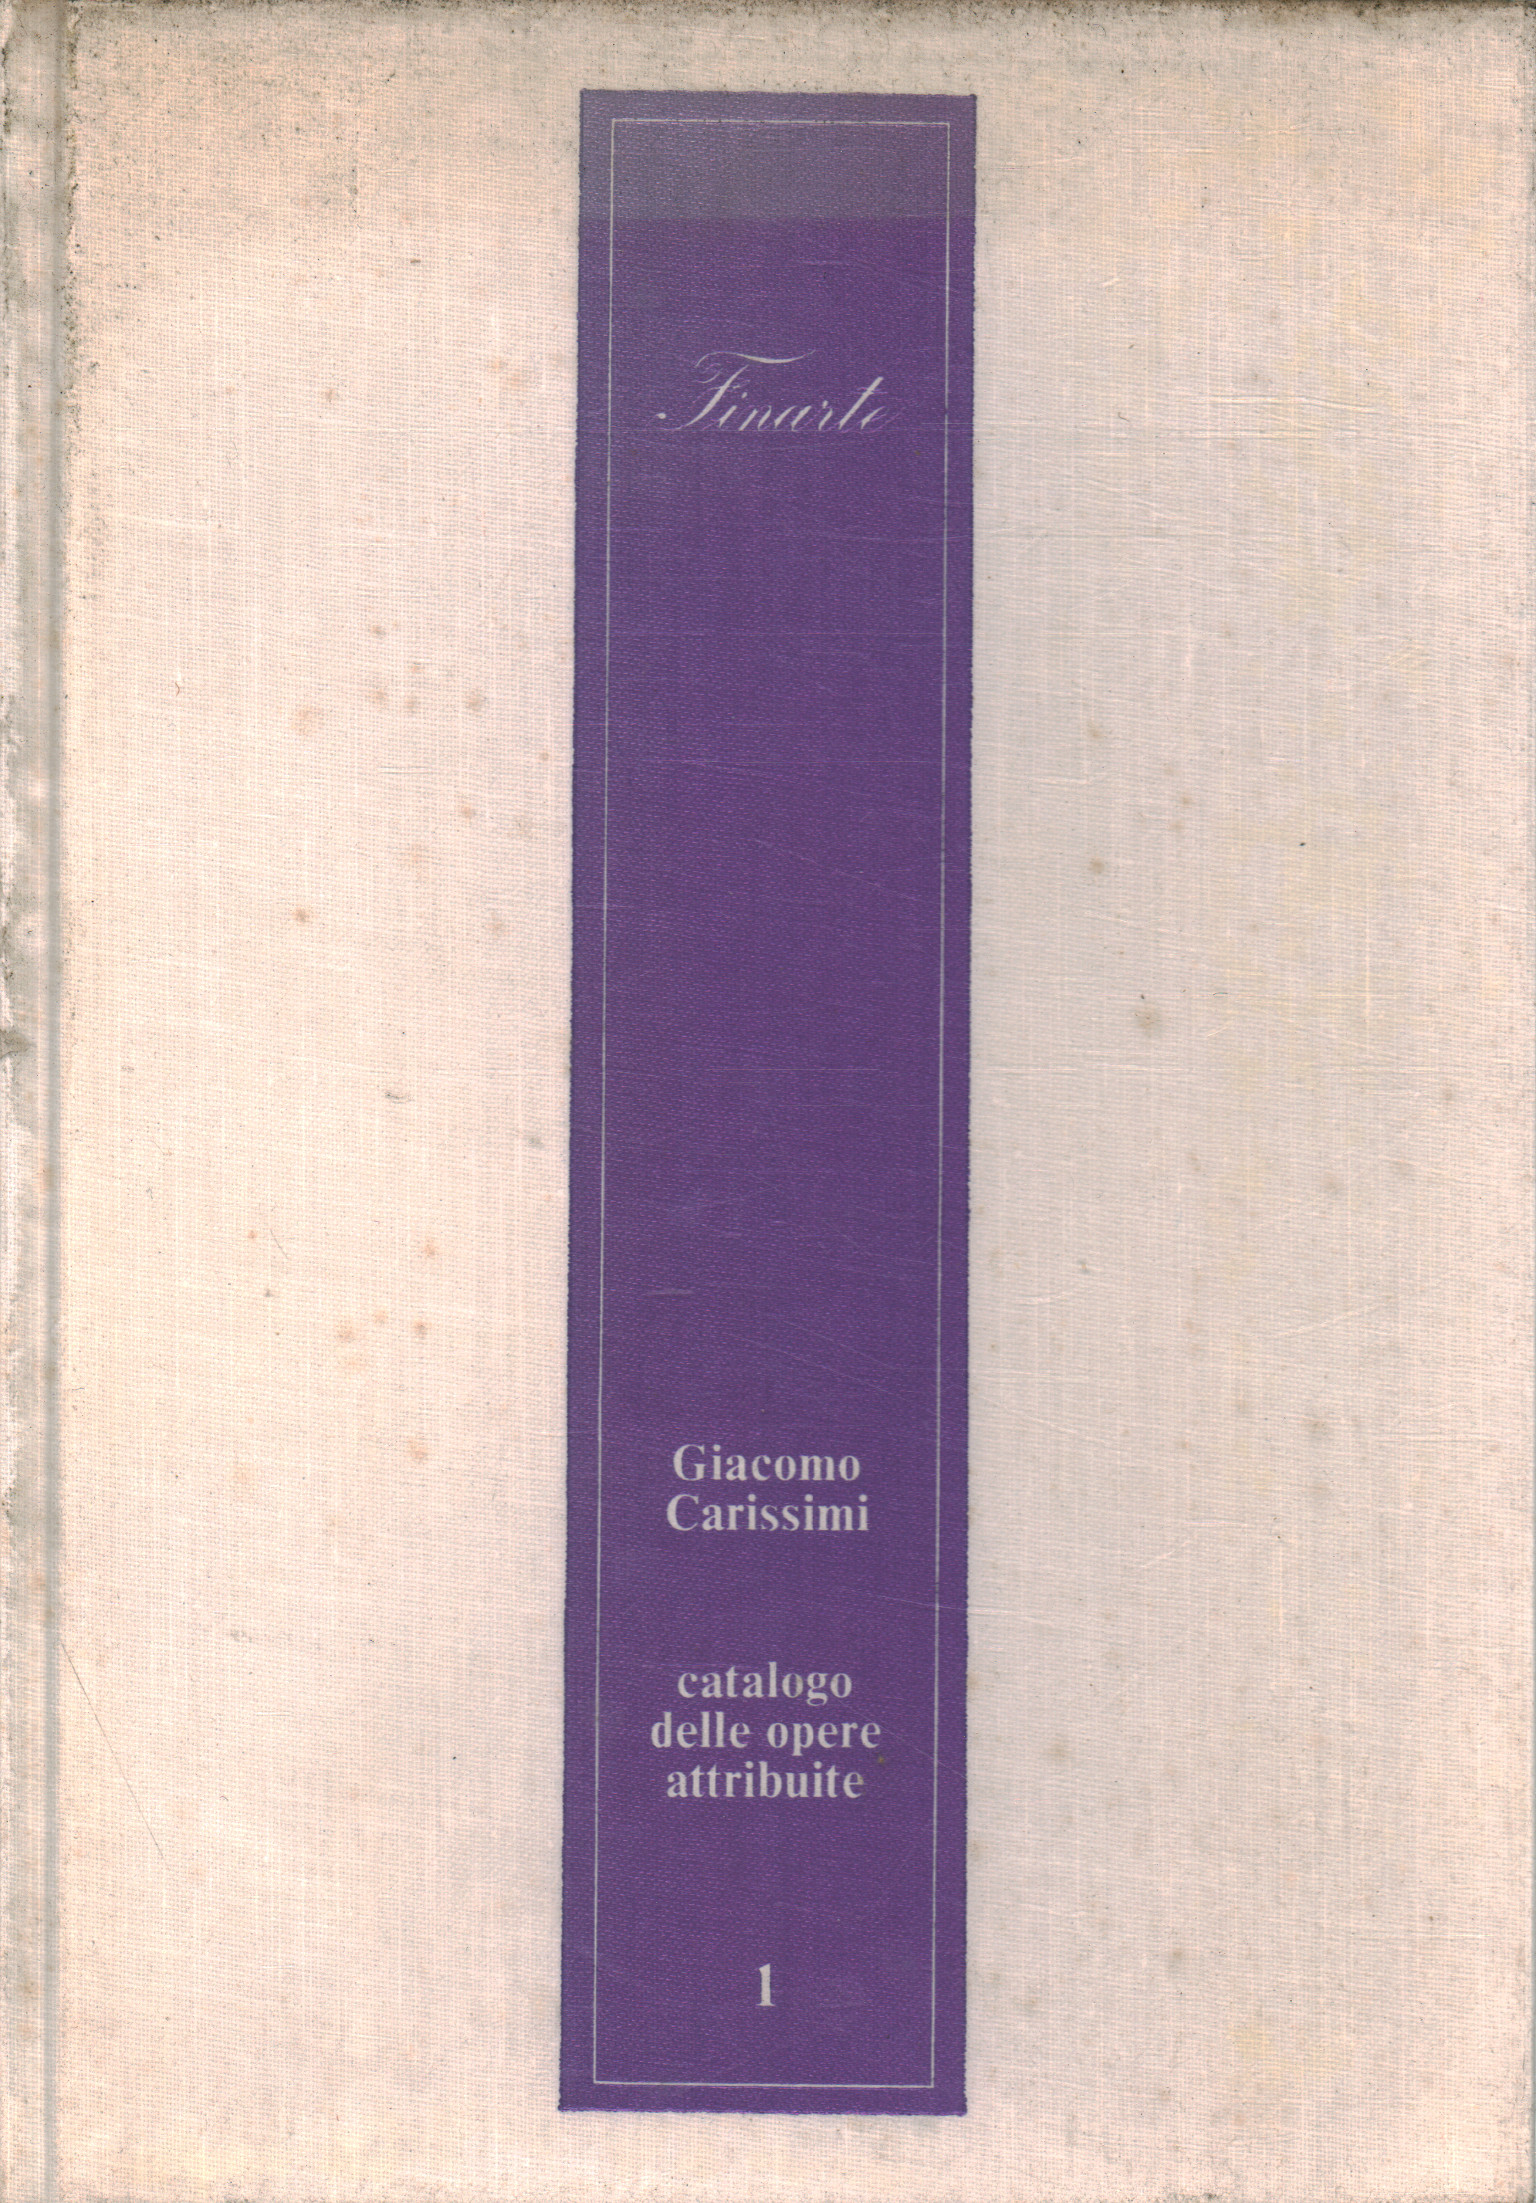 Catalog of the works attributed 1, Giacomo Carissimi